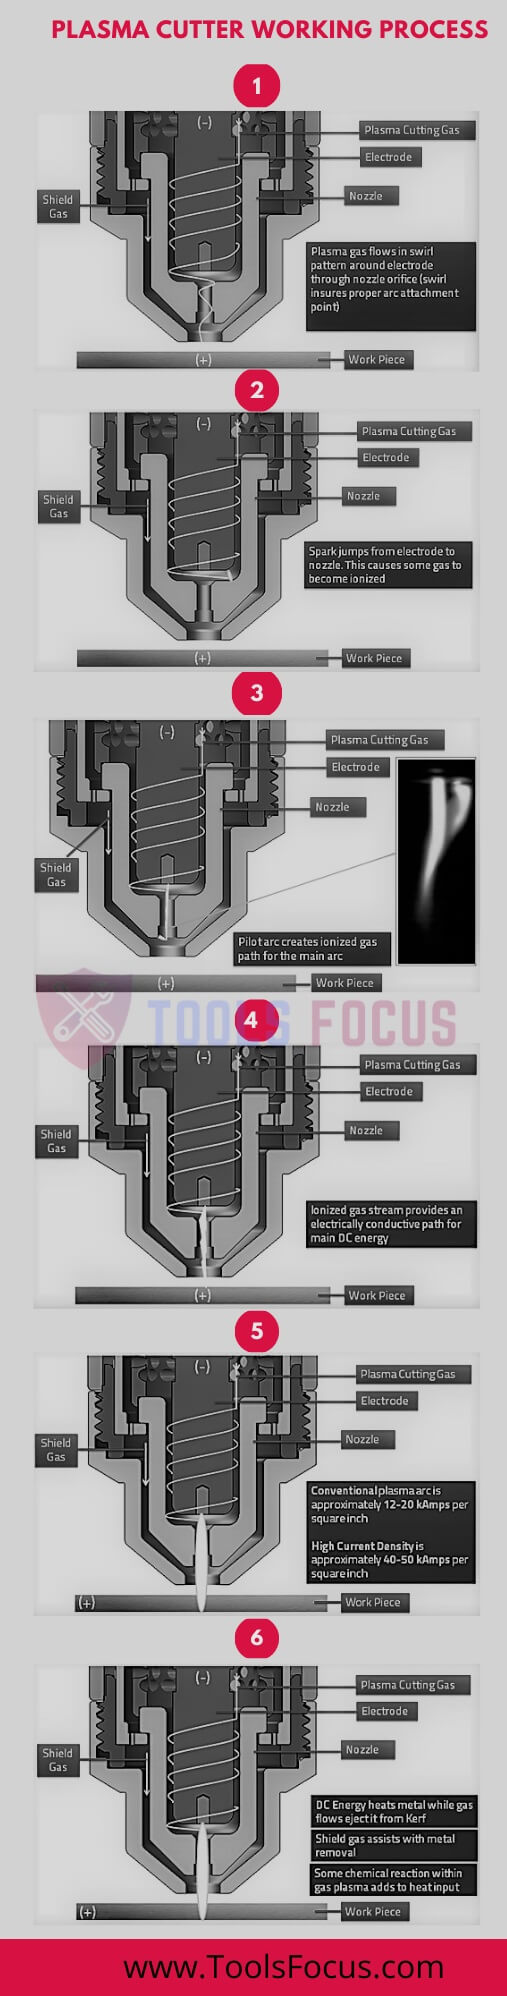 infographic Plasma Cutter Working process